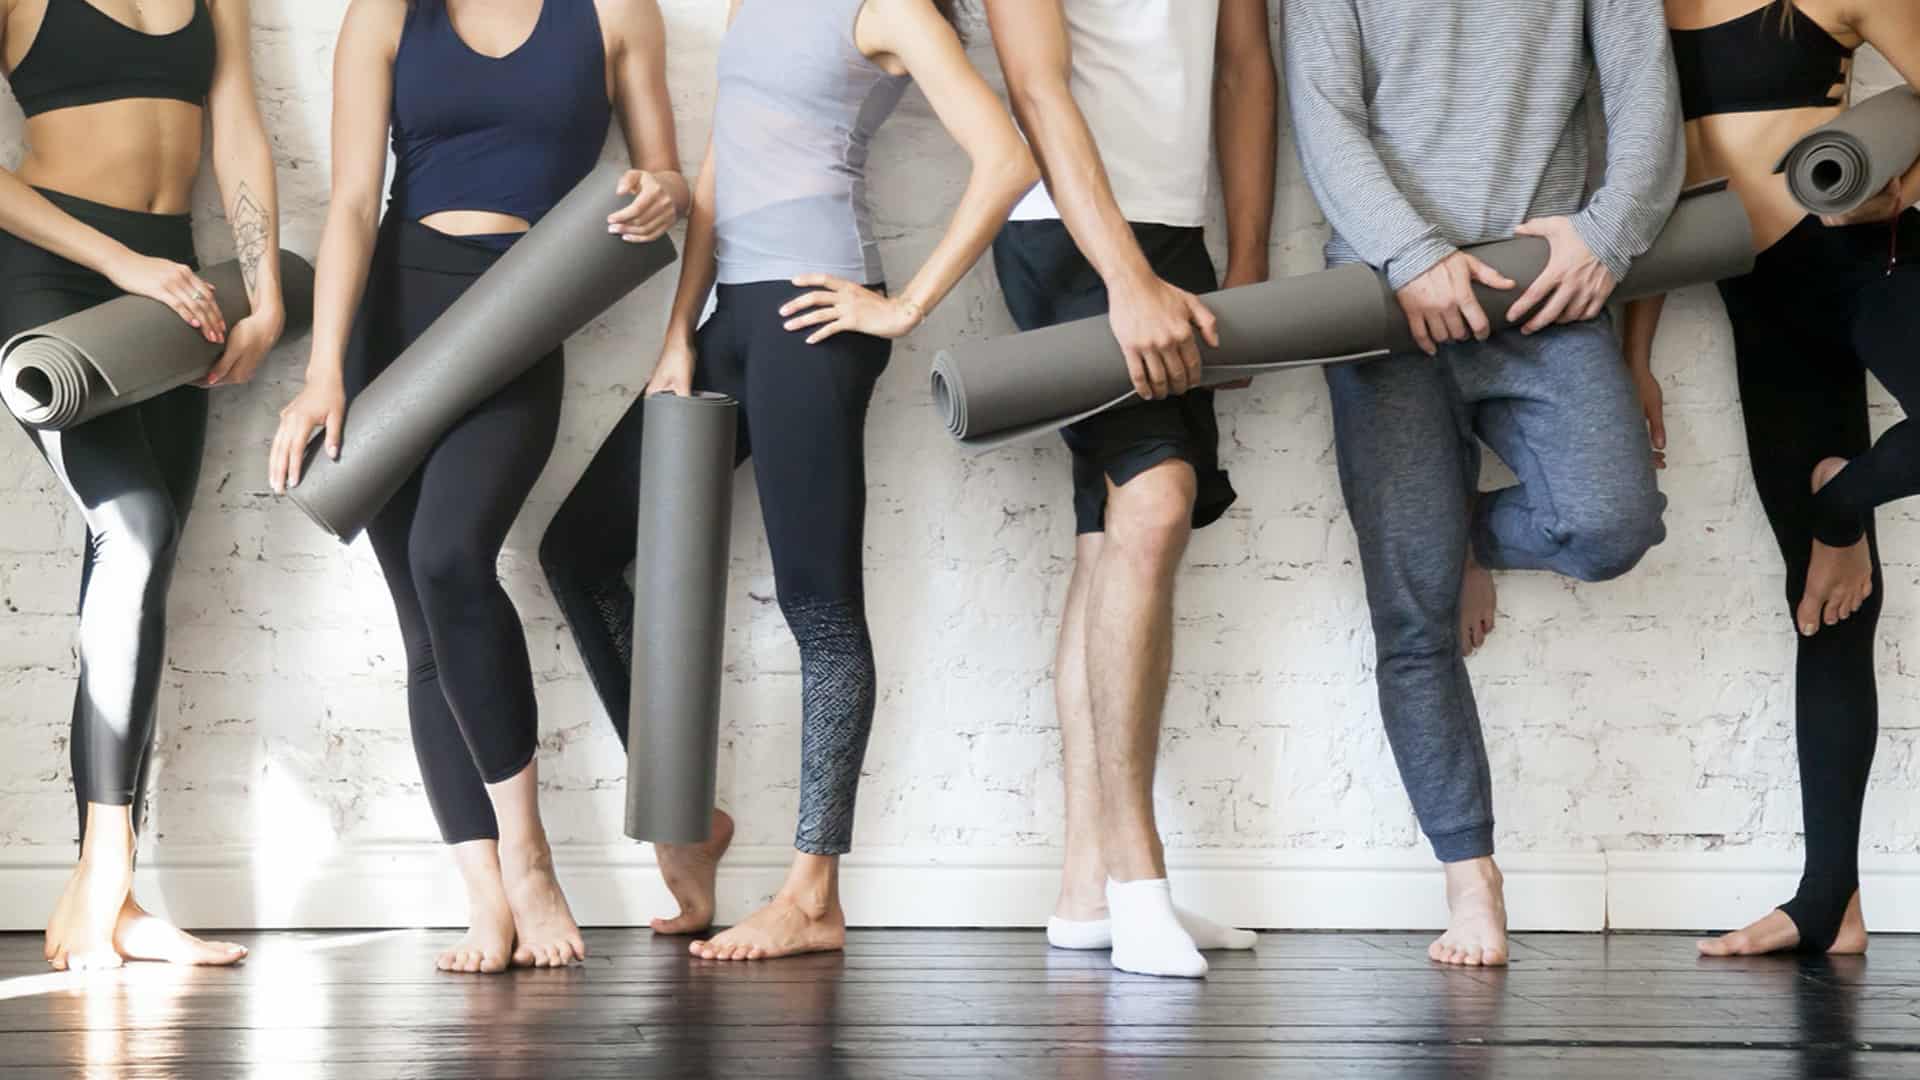 Group Holding Yoga Mats | 3 Ways to Stay Active and Healthy During COVID-19